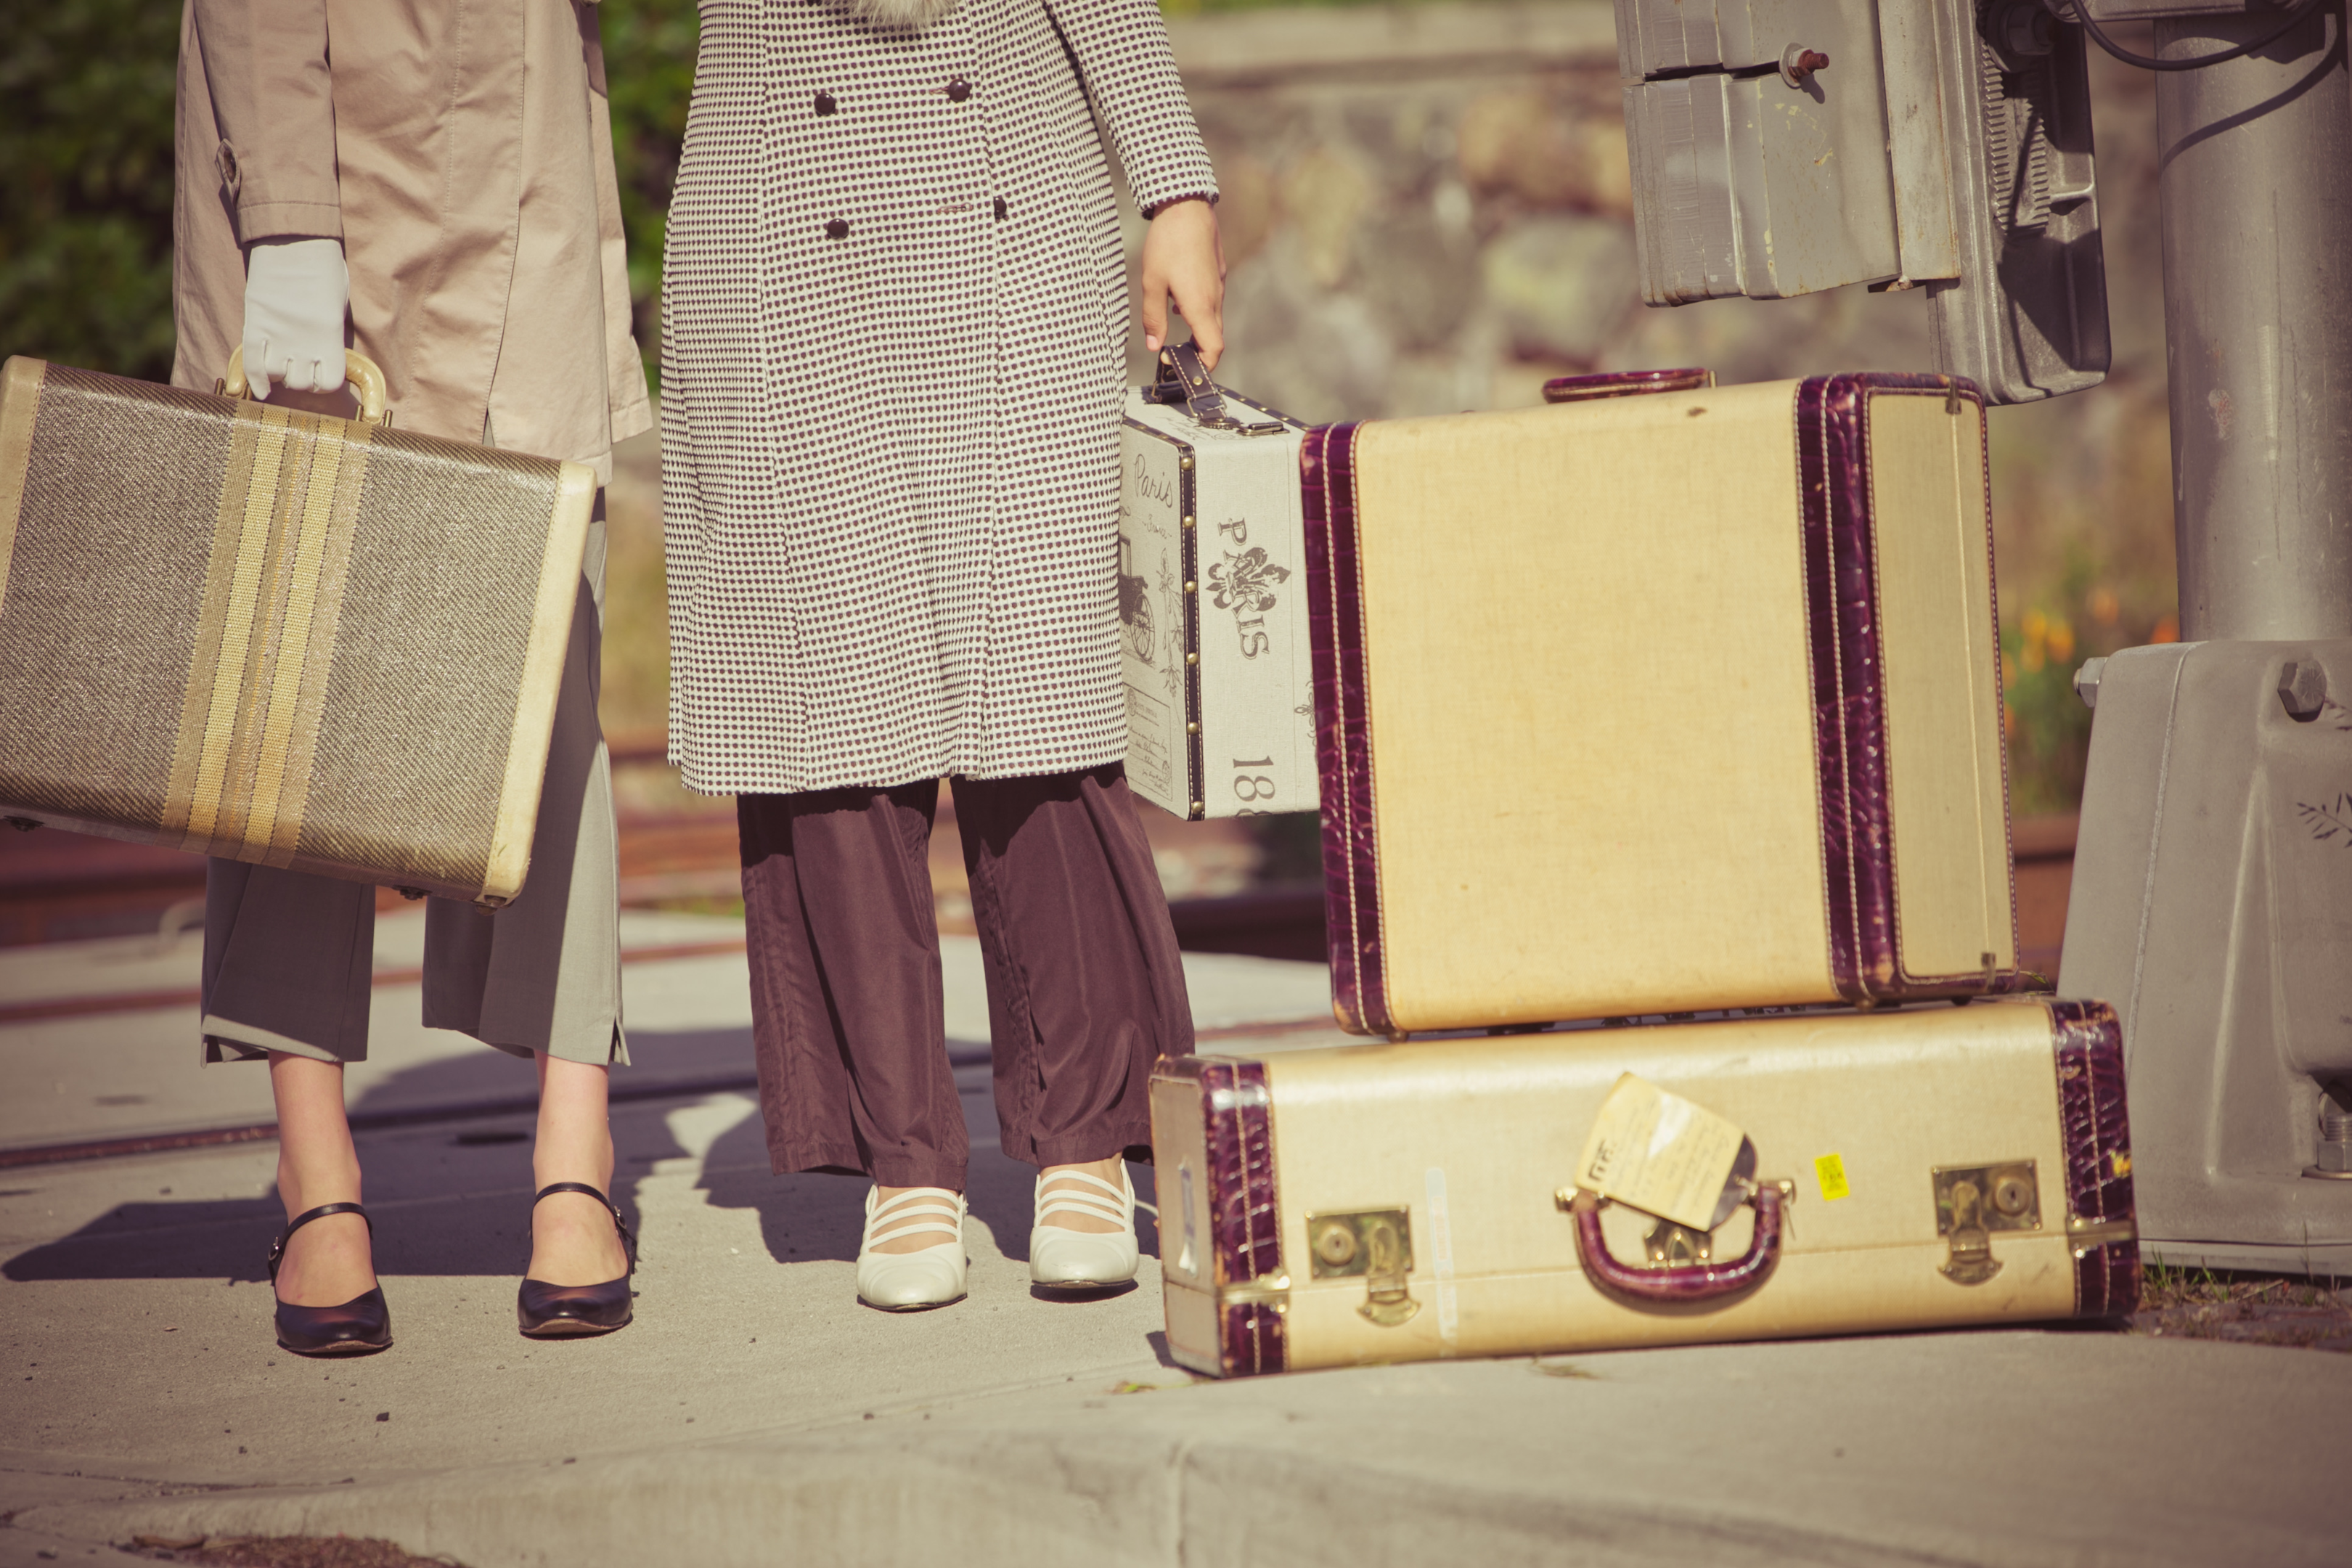 https://elements.envato.com/two-young-women-holding-their-vintage-suitcases-MFV58A6